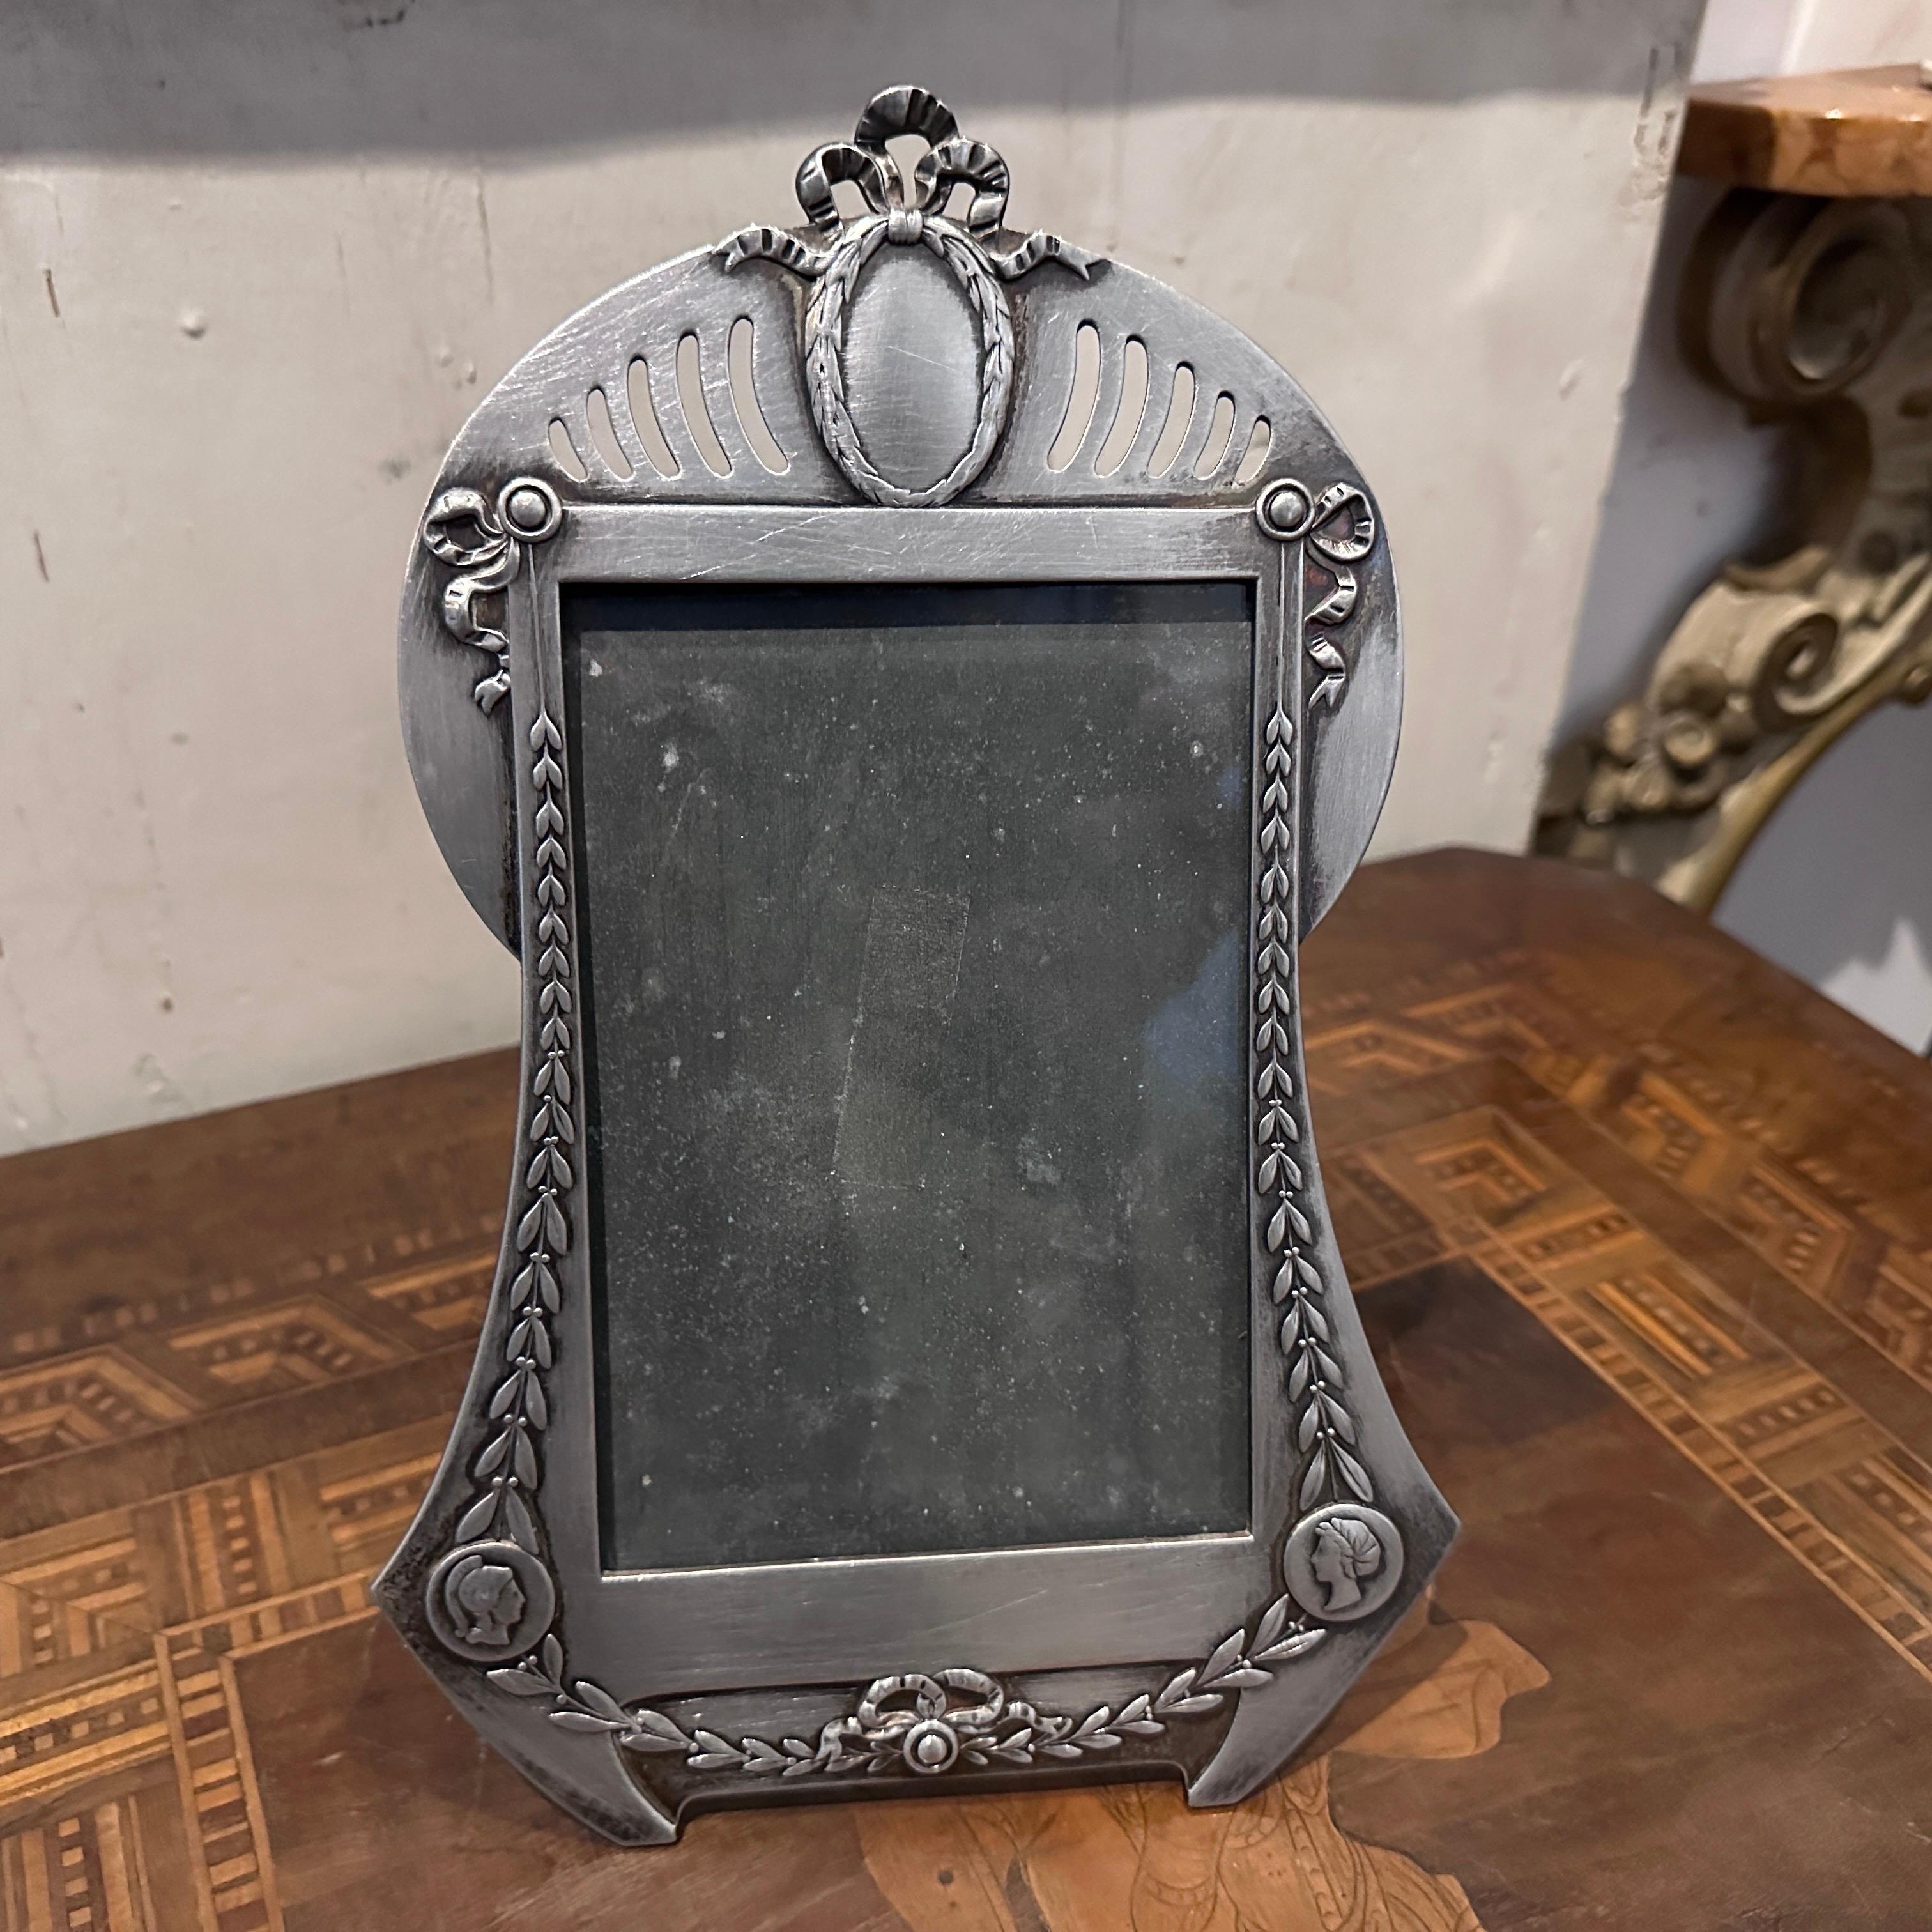 A beautiful Art Nouveau picture frame designed and manufactured in Germany by W.M.F. in early 20th century. It's marked on the back side and with 216, number of the W.M.F. catalogue of the period. This picture frame by W.M.F. is an exquisite example